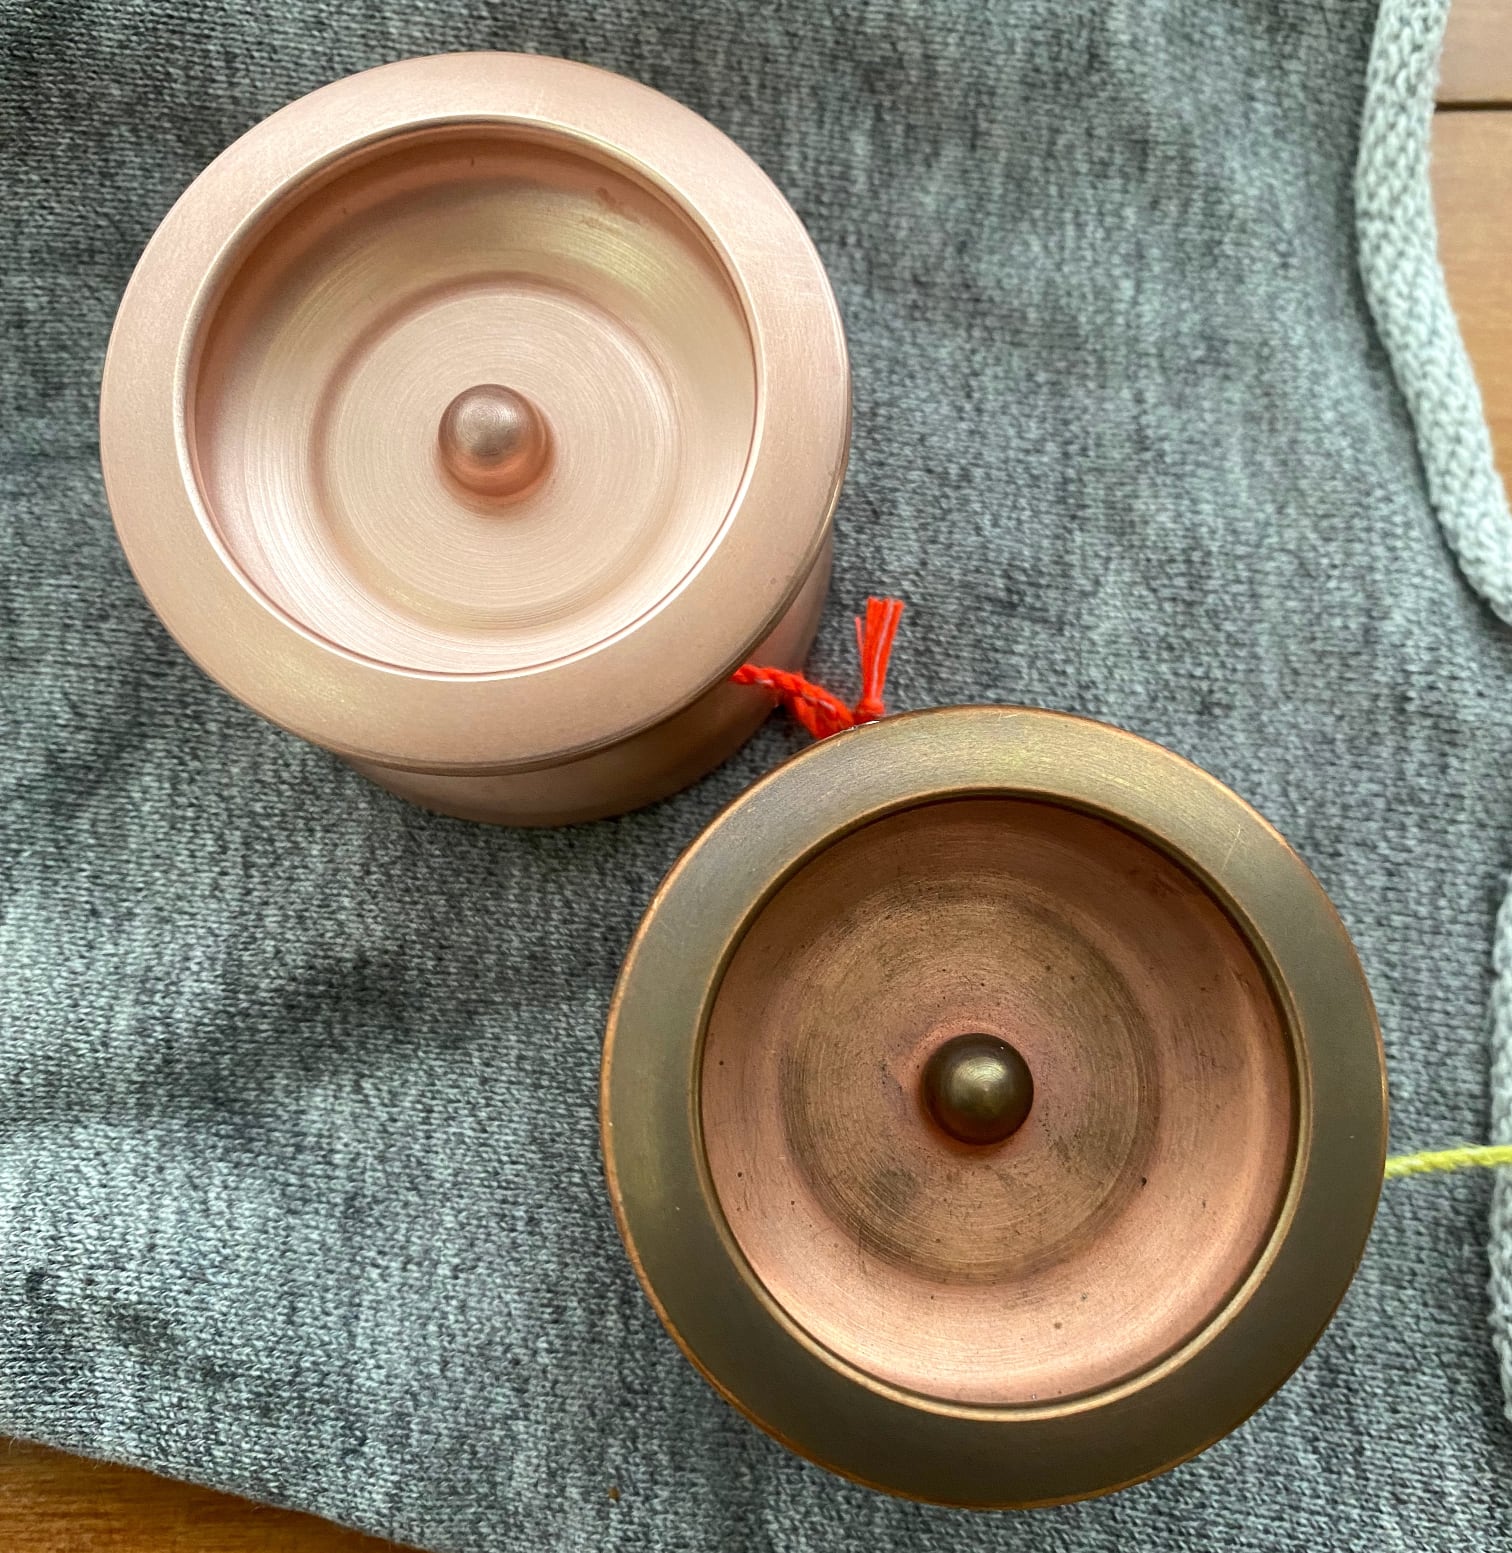 Two Copper Theodore yoyos side by side, one is bright and clean, the other has a heavier patina with some darkening and finger prints.